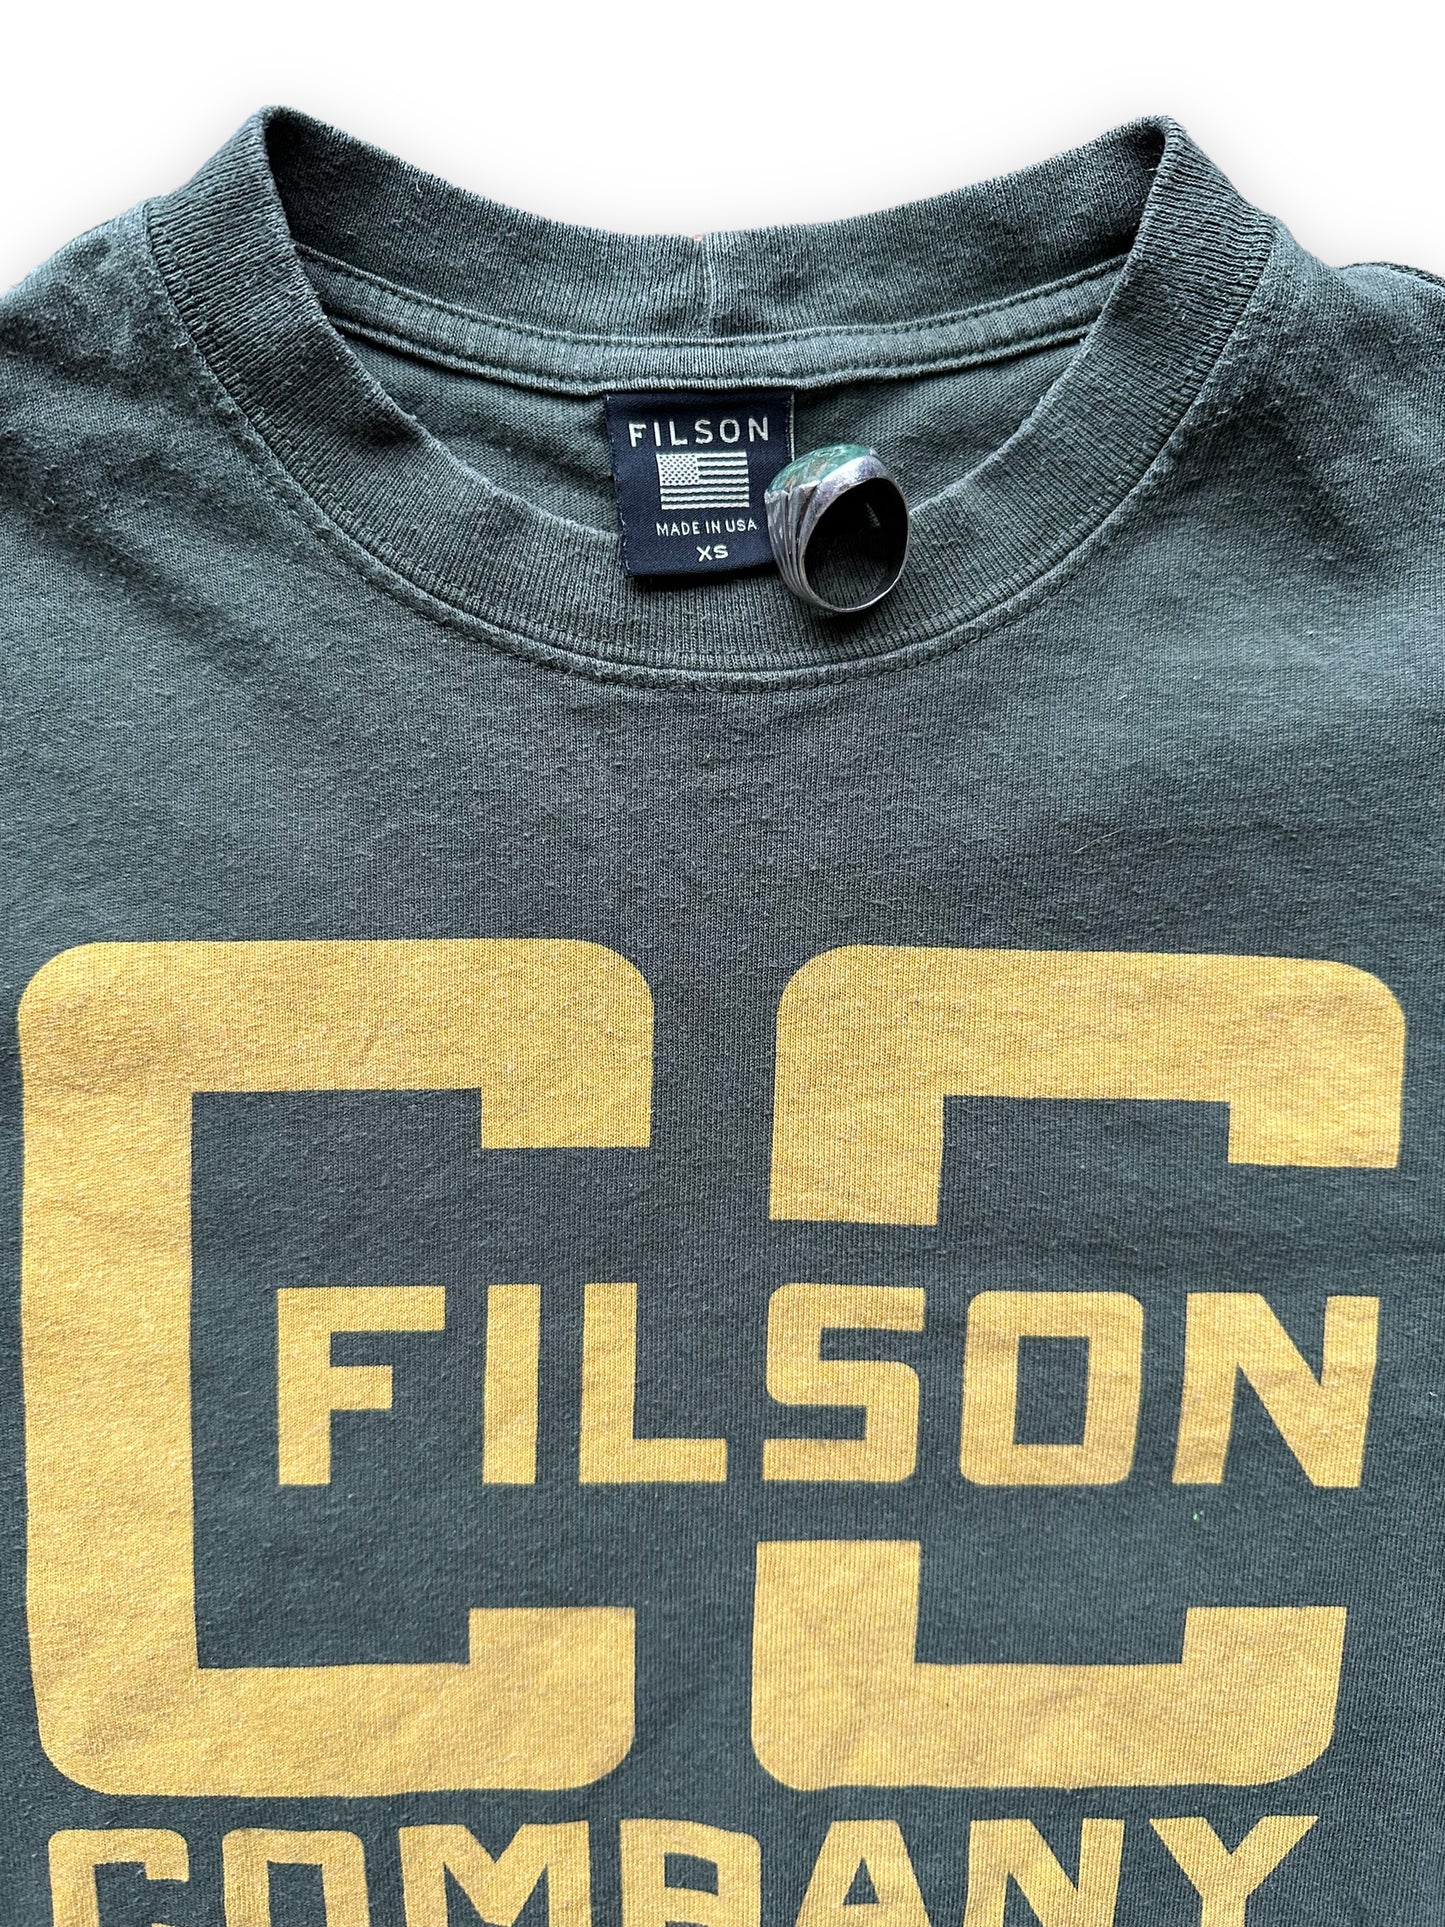 Tag View of Olive Green Filson Cotton Tee SZ XS  |  Barn Owl Vintage Goods | Filson Graphic Tees Seattle